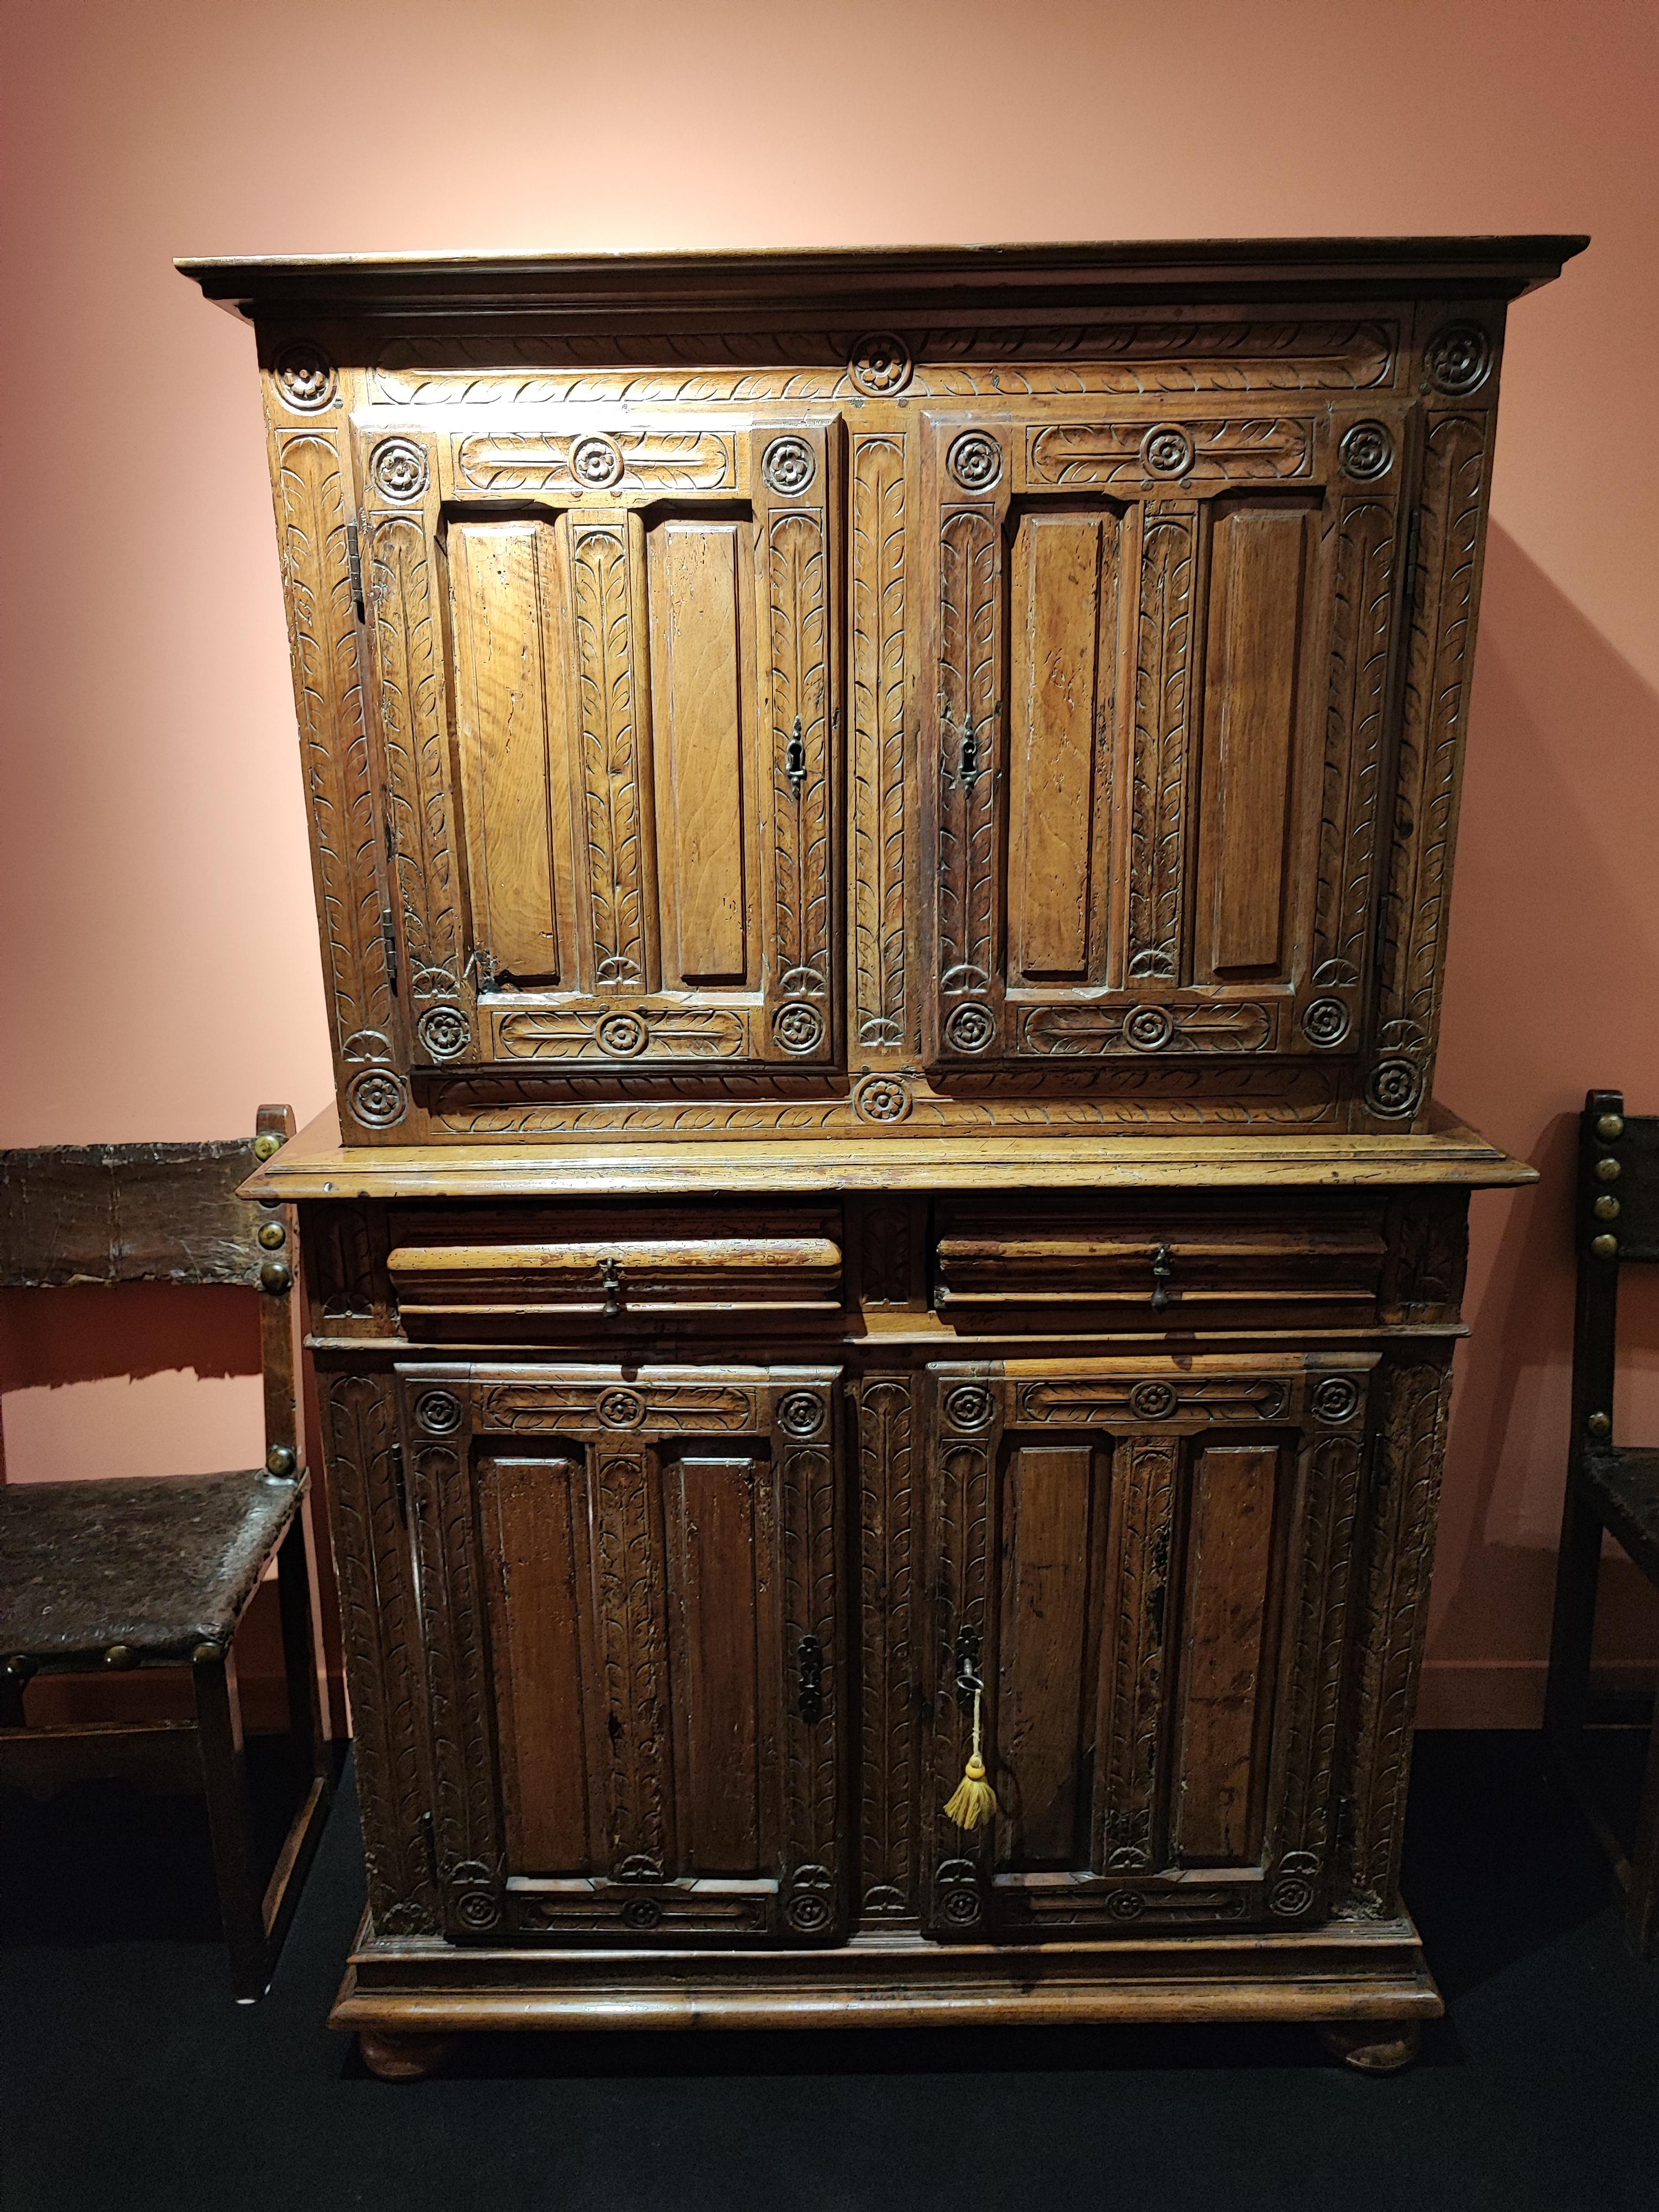 Small two-body buffet decorated with bird feathers

ORIGIN : FRANCE
PERIOD : 16th CENTURY

Measures: height: 170 cm
length: 106 cm
depth: 51 cm 

Walnut wood



This charming cabinet presents a great unity of ornamentation with its